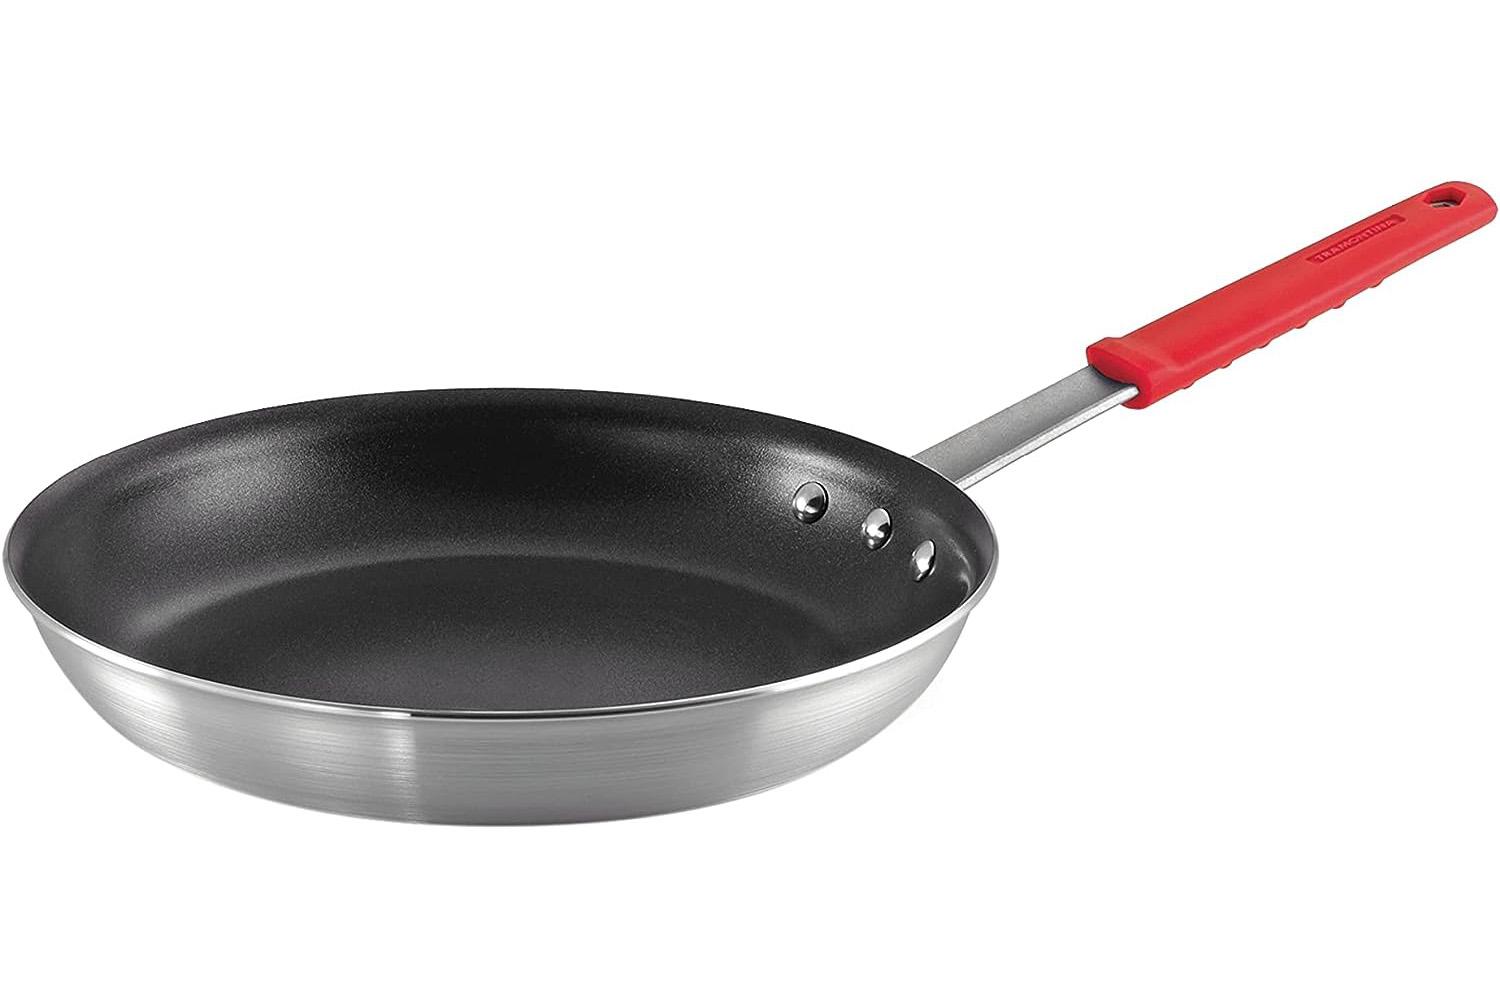 Tramontina 12in Professional Fry Pans for $23.99